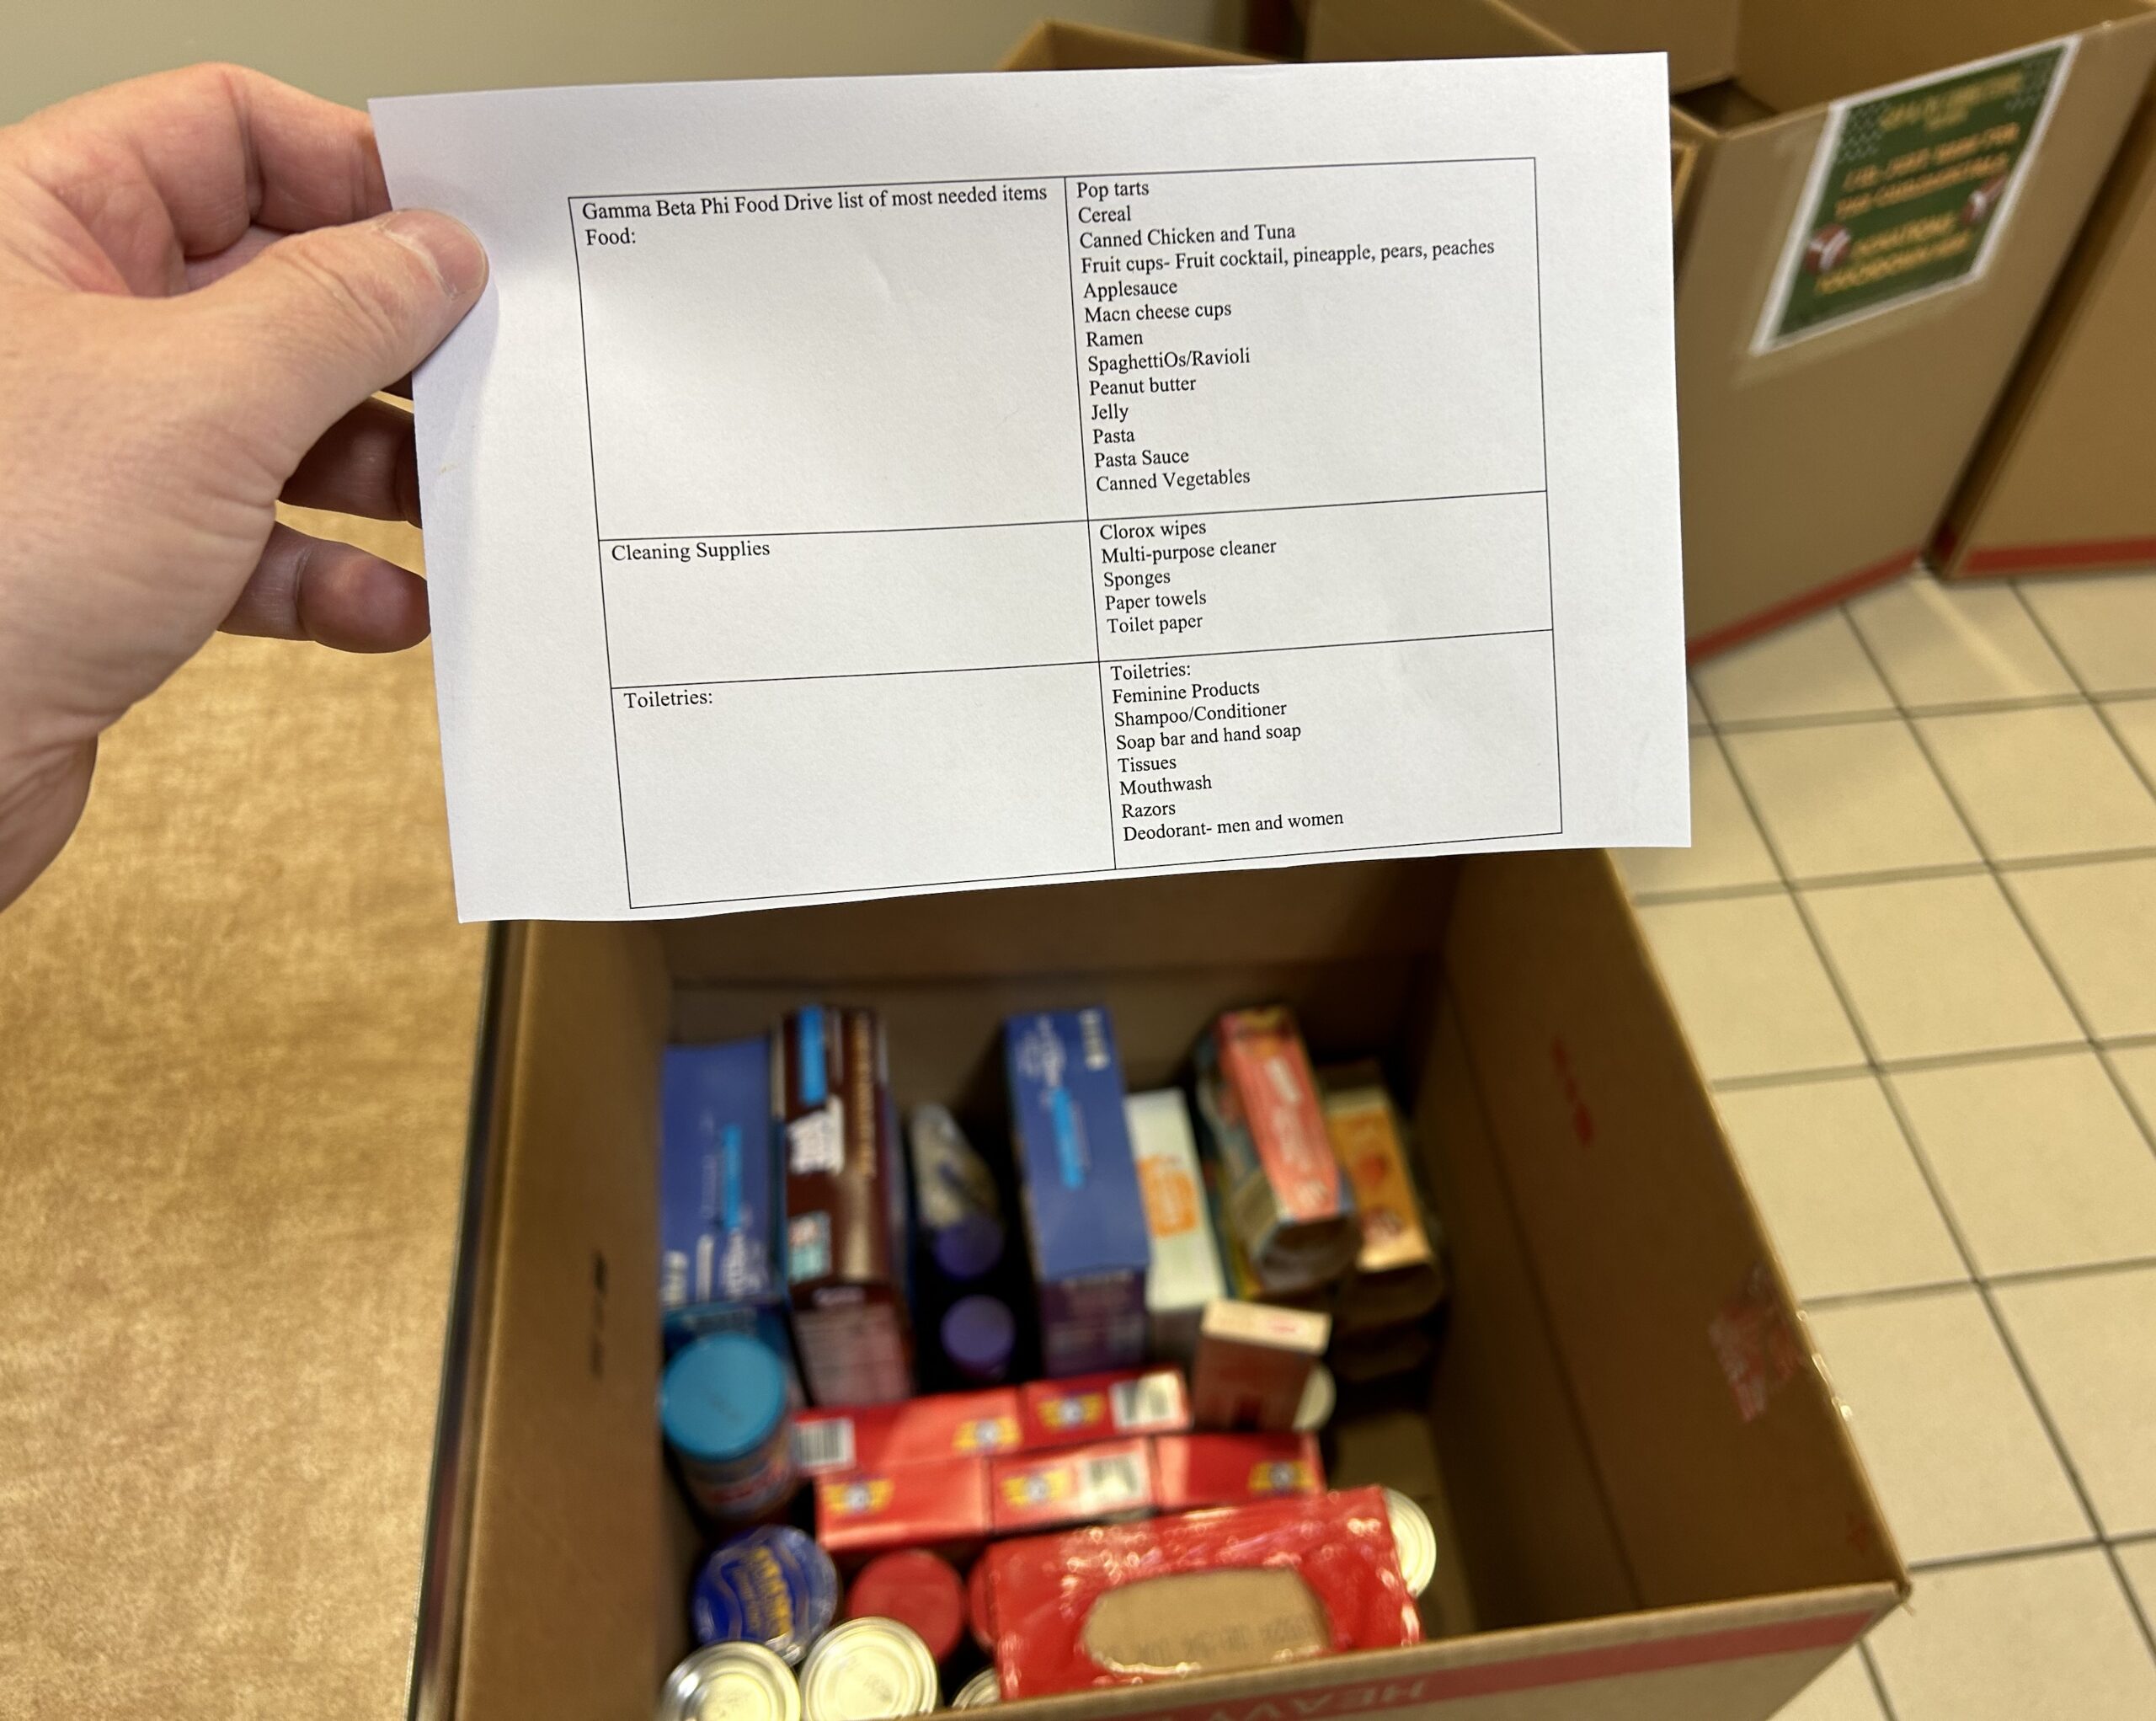 Hand holding a white paper form with a list of items to donate to the campus food pantry